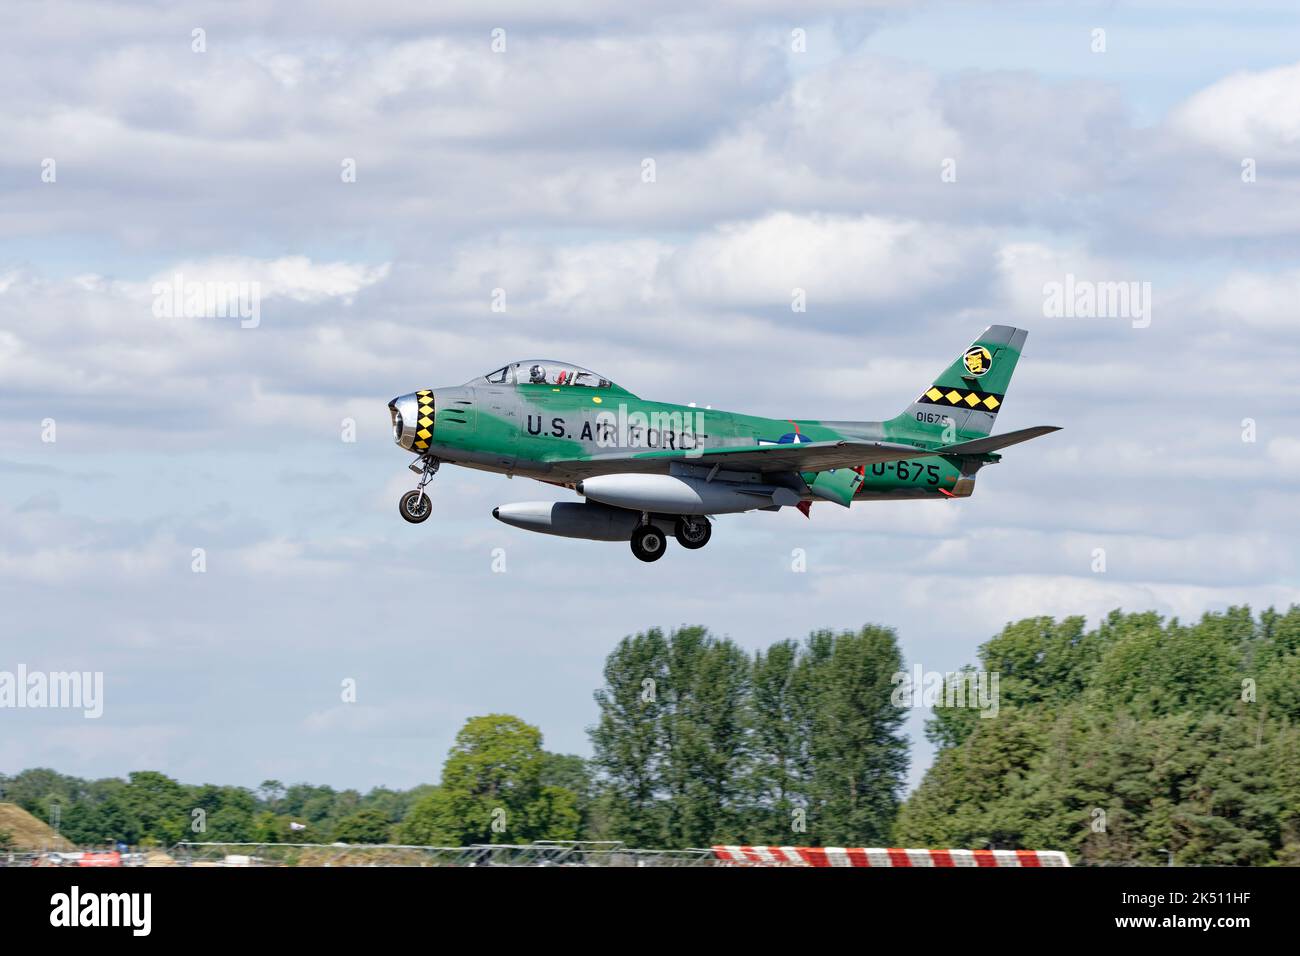 Mistral Aviation's immaculate North American F-86 Sabre heritage fighter jet arrivesat RAF Fairford in Gloucestershire England to participate at RIAT Stock Photo